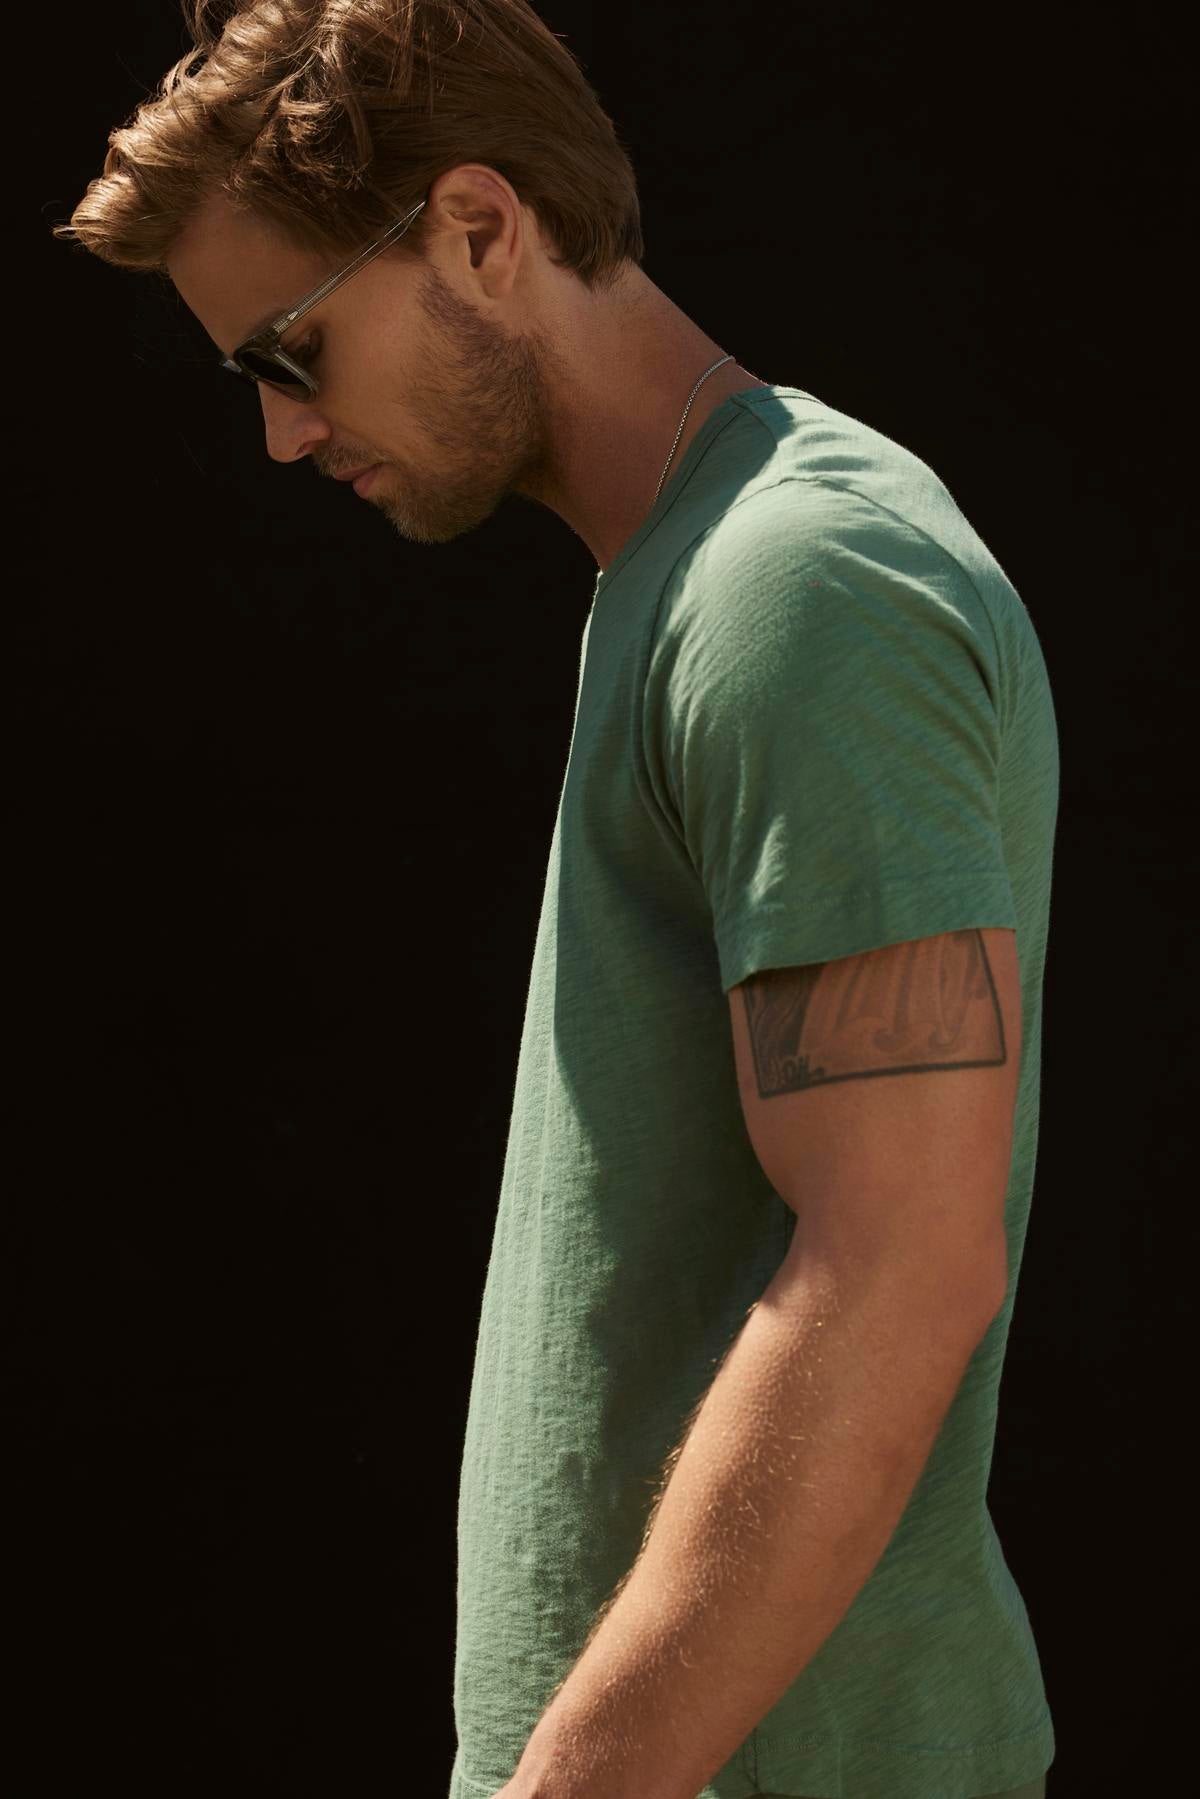 A man in a stylish green AMARO TEE by Velvet by Graham & Spencer and sunglasses is standing against a dark background, looking down with a neutral expression. He has short hair and a tattoo on his upper arm.-36918645981377